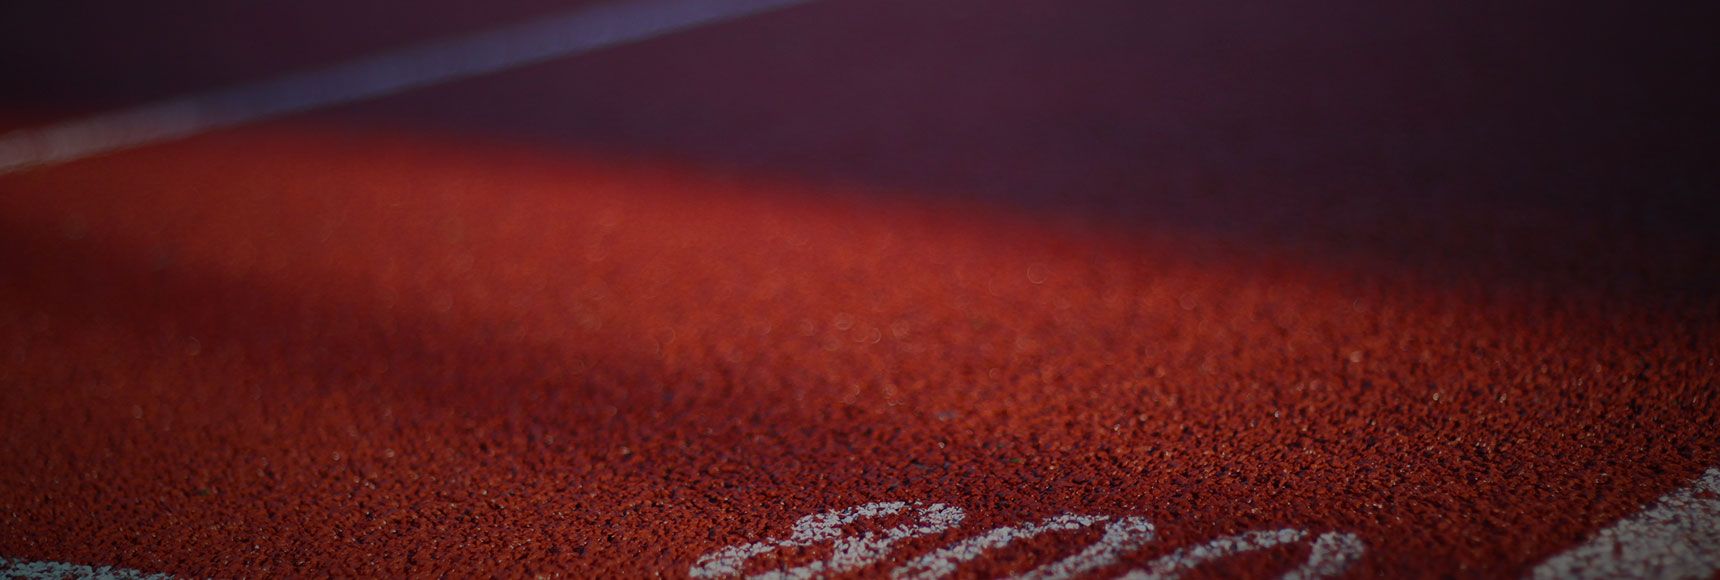 Abstract image of a running track